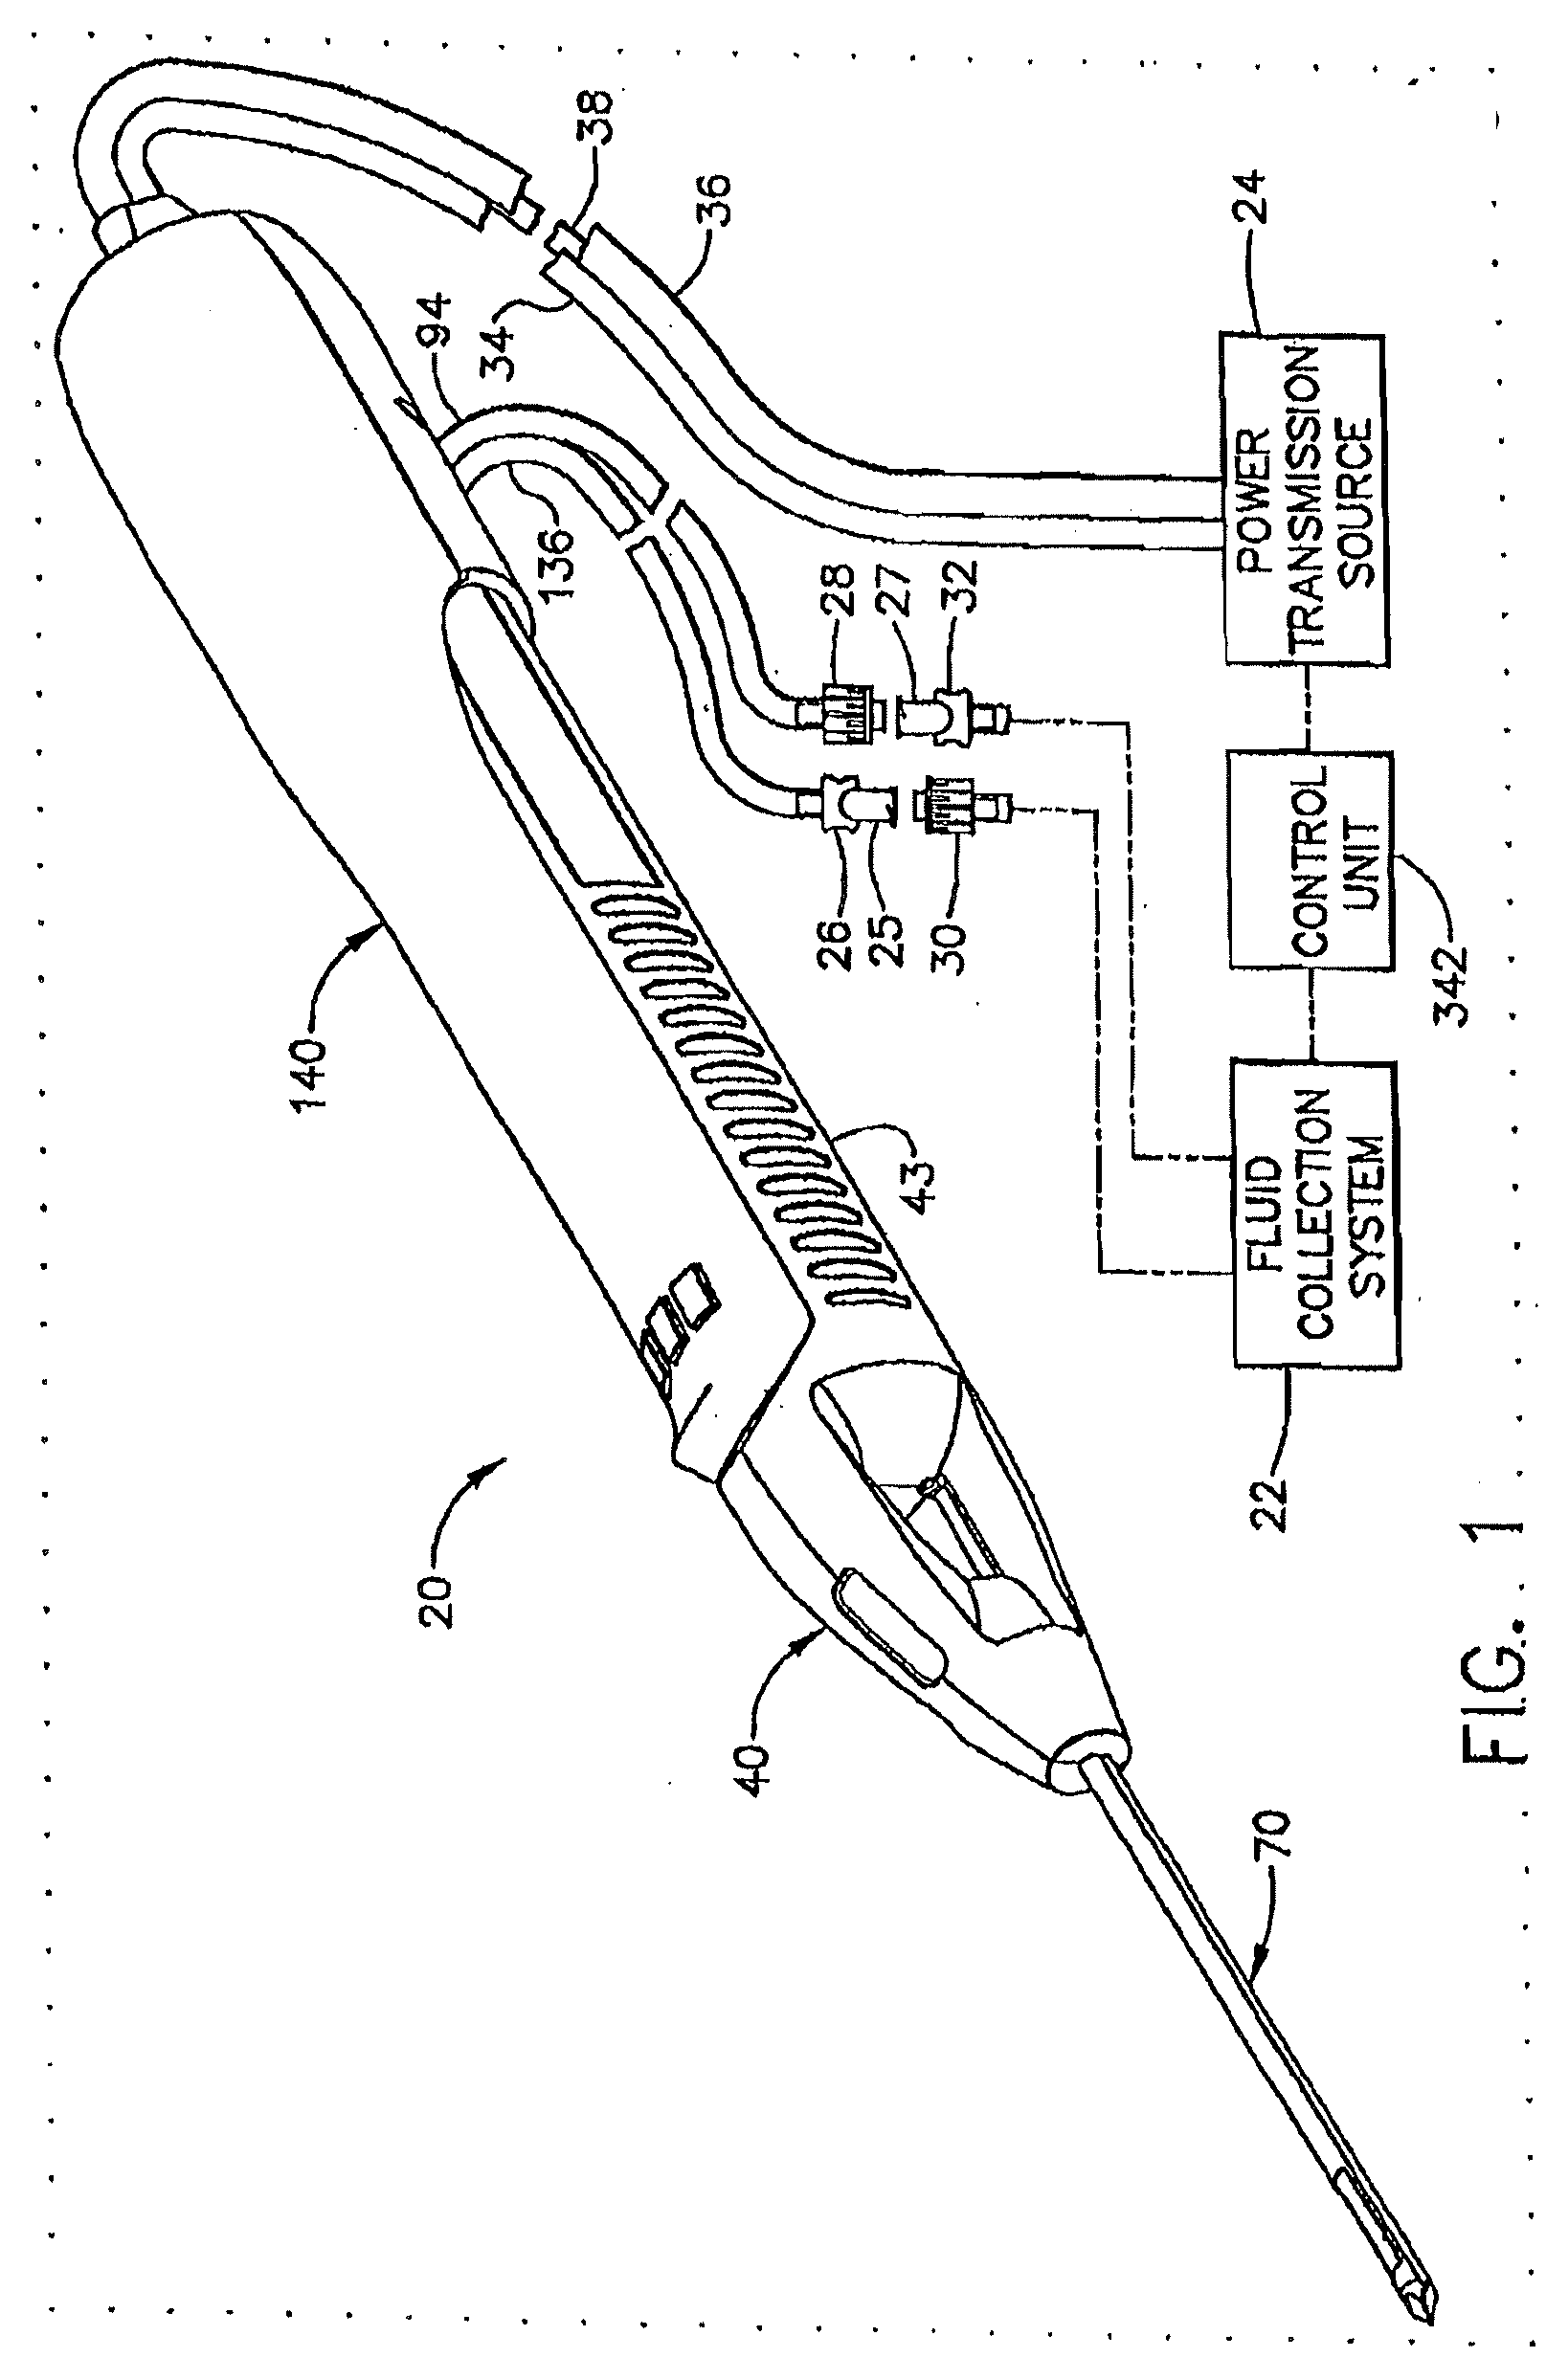 Surgical device for the collection of soft tissue